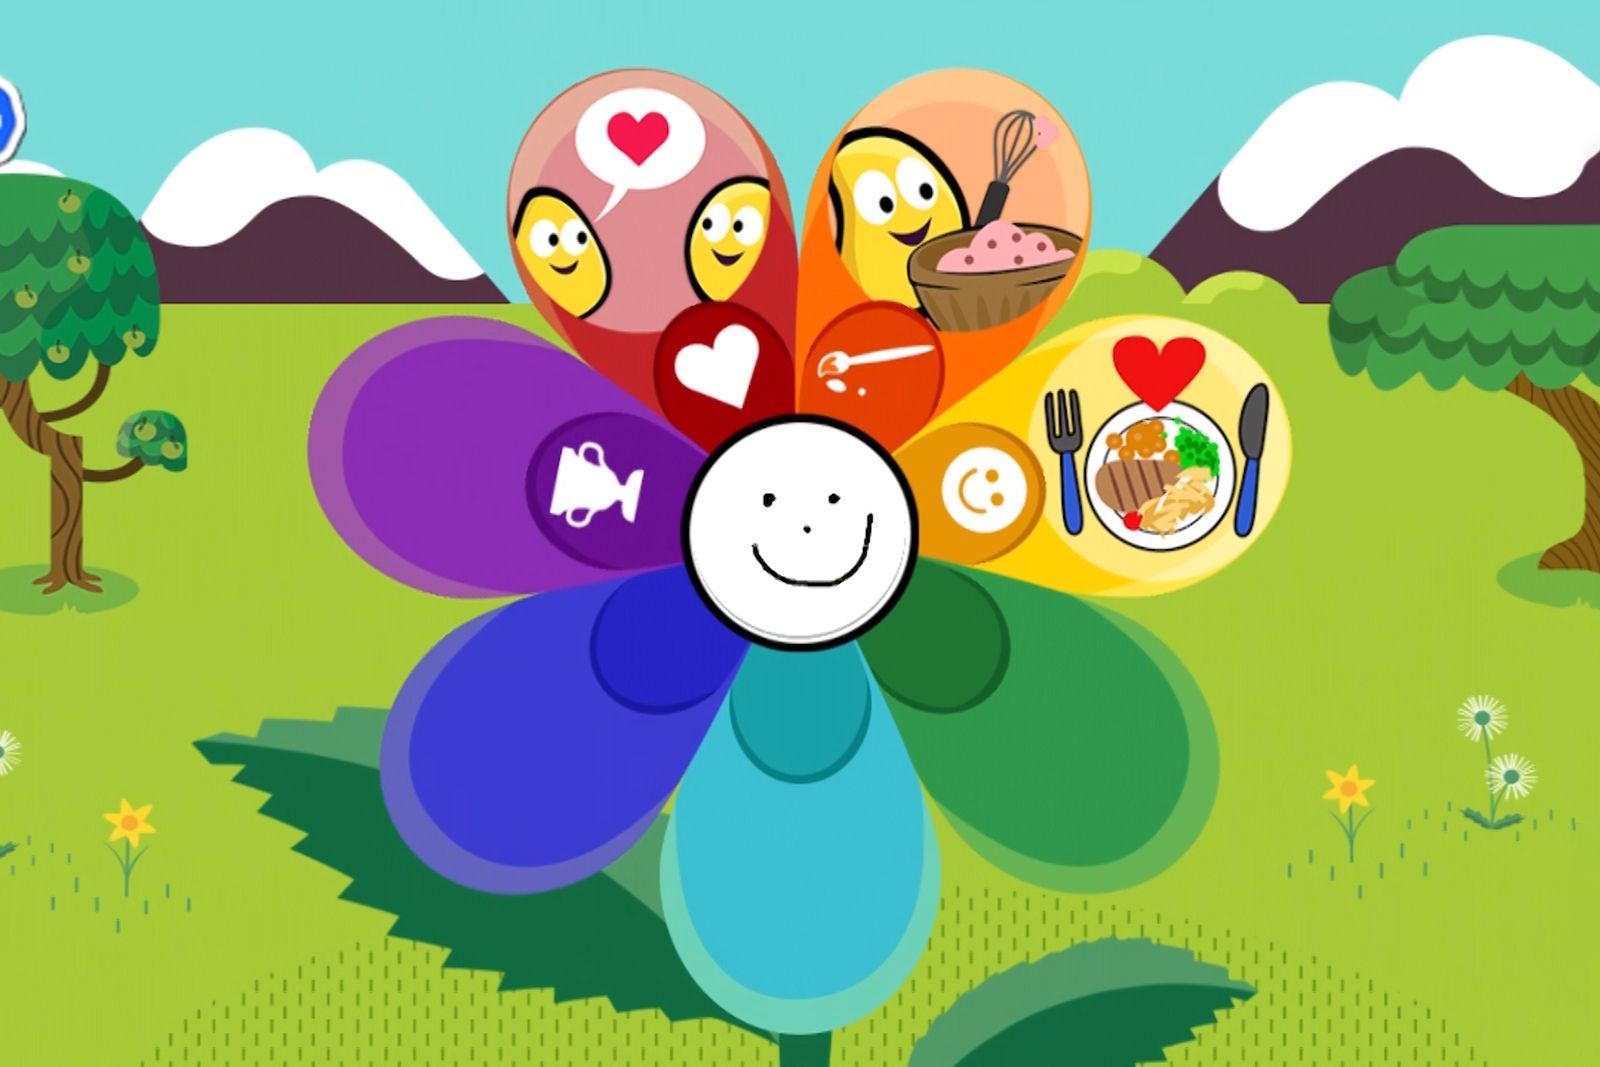 BBC helps pre-schoolers with mindfulness exercises in app update image 1